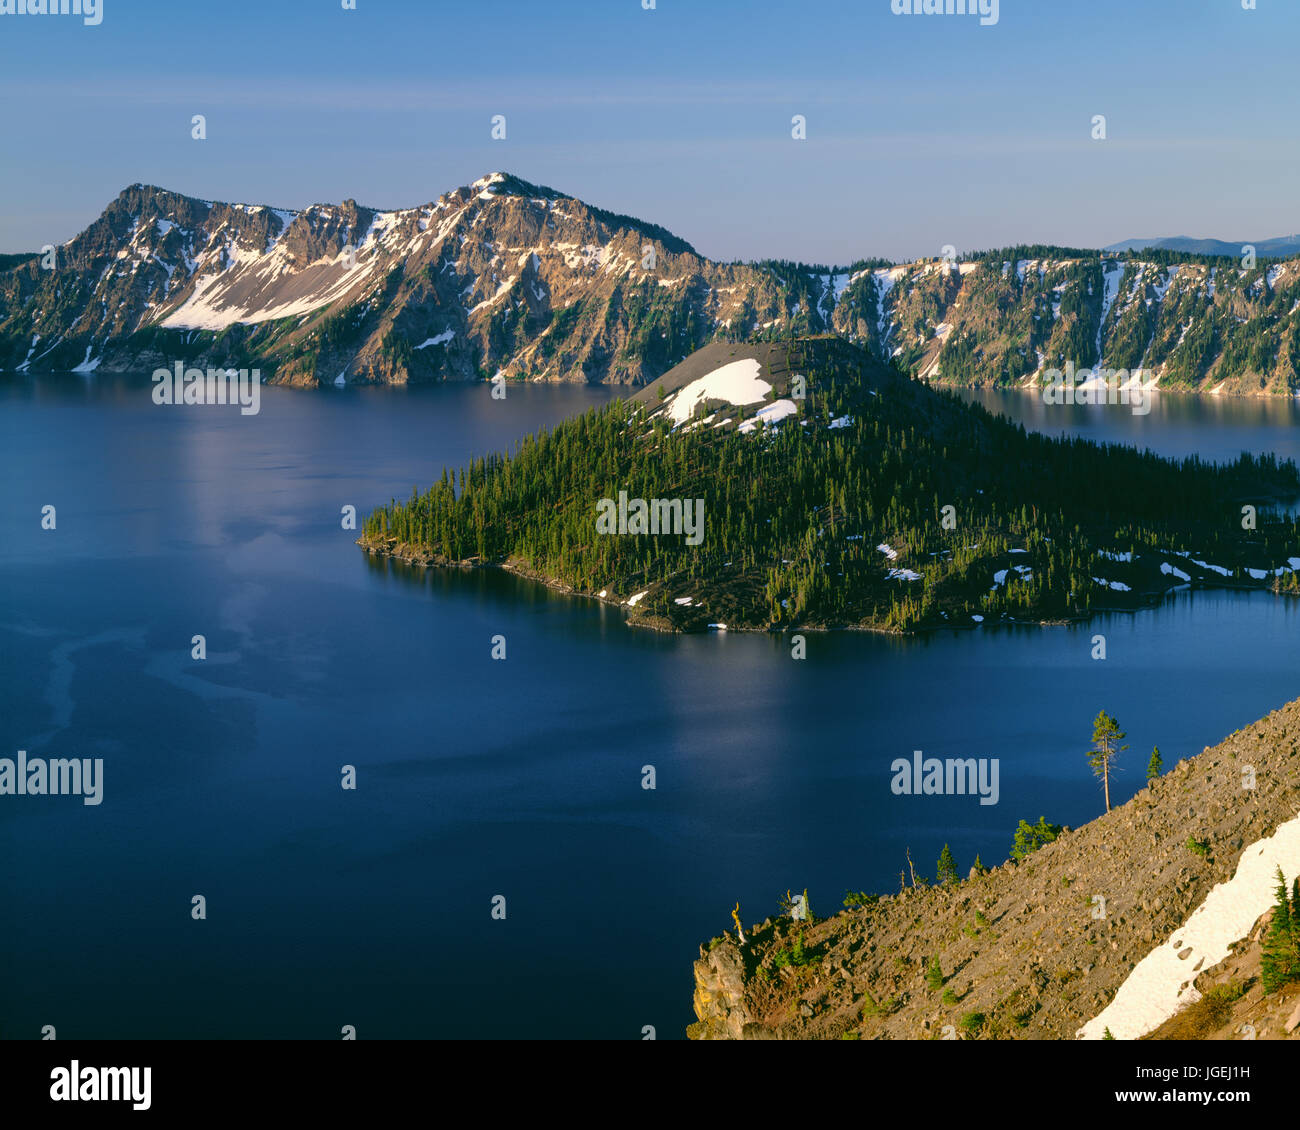 USA, Oregon, Crater Lake National Park, Sunrise on Crater Lake and Wizard Island with Garfield Peak  rising above Crater Lake; from Merriam Point. Stock Photo